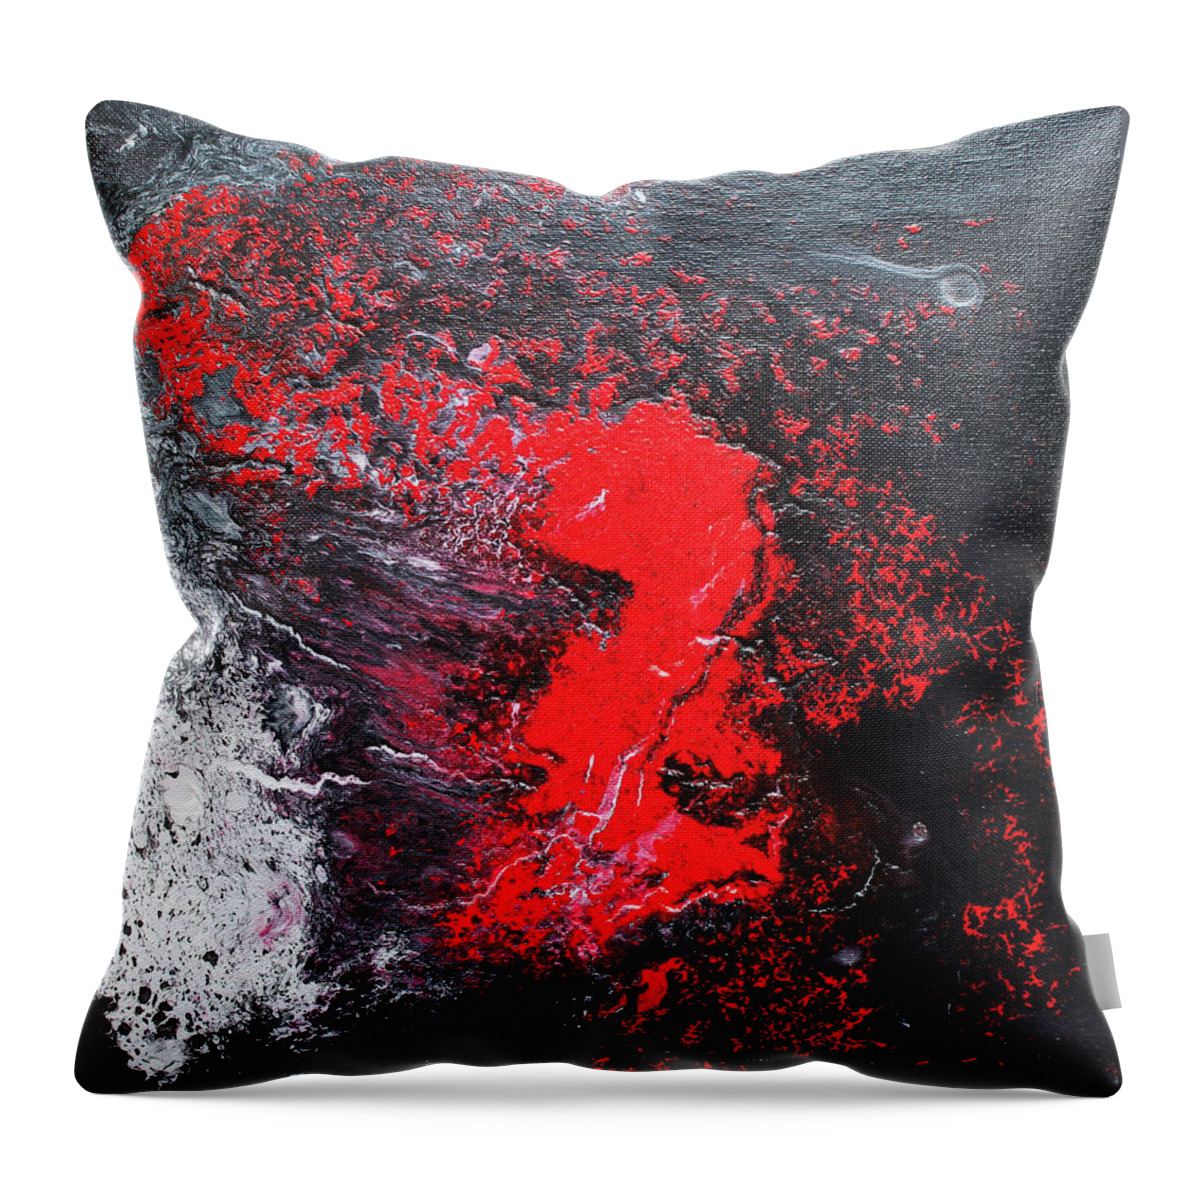  Throw Pillow featuring the painting Malum Deus by Embrace The Matrix